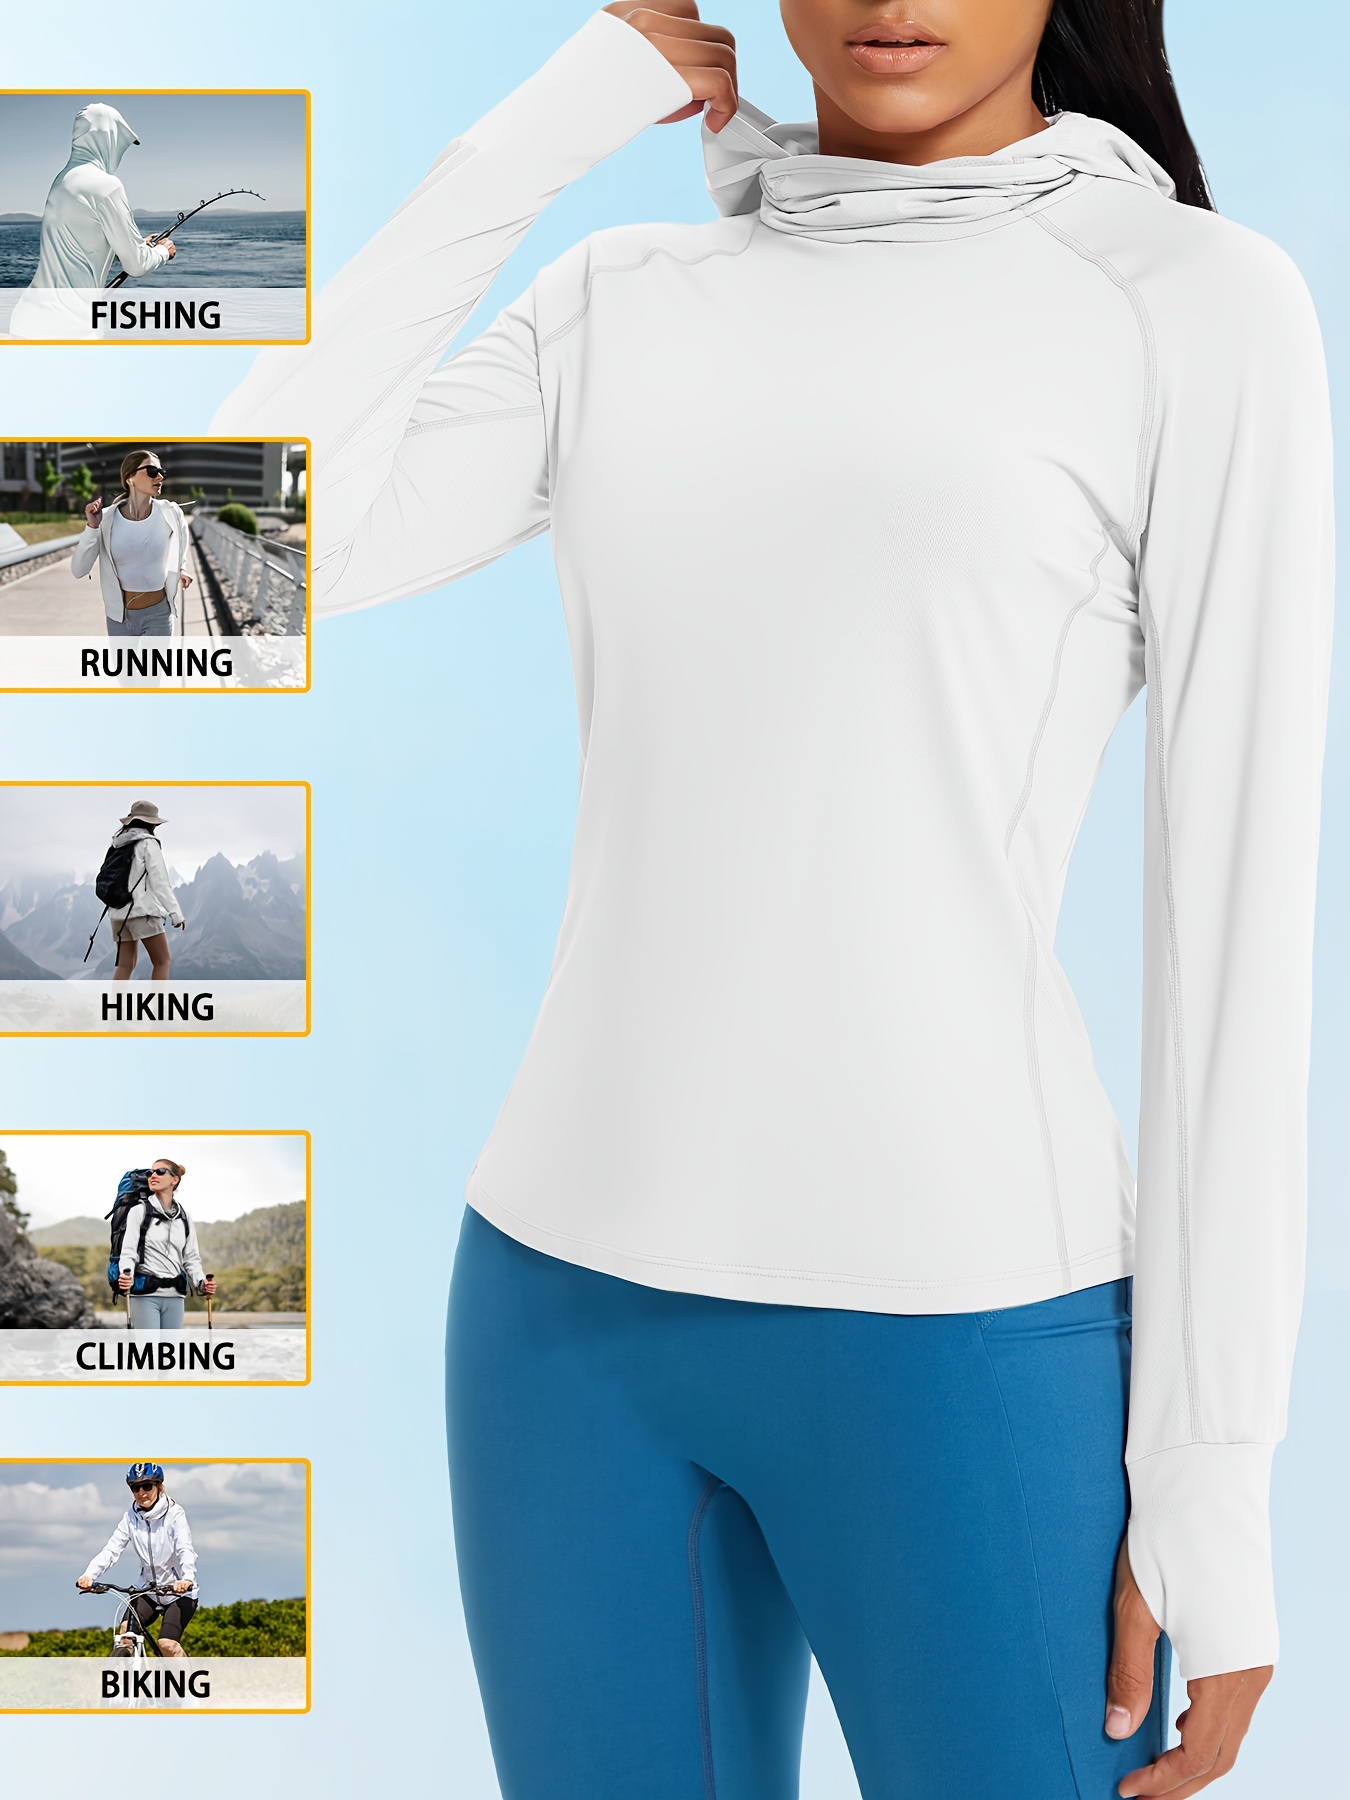 Women's Long Sleeves Athletic Shirts, 1/4 Zip Pullover Running Hiking  Workout Yoga Tops With Thumb Hole, Women's Activewear